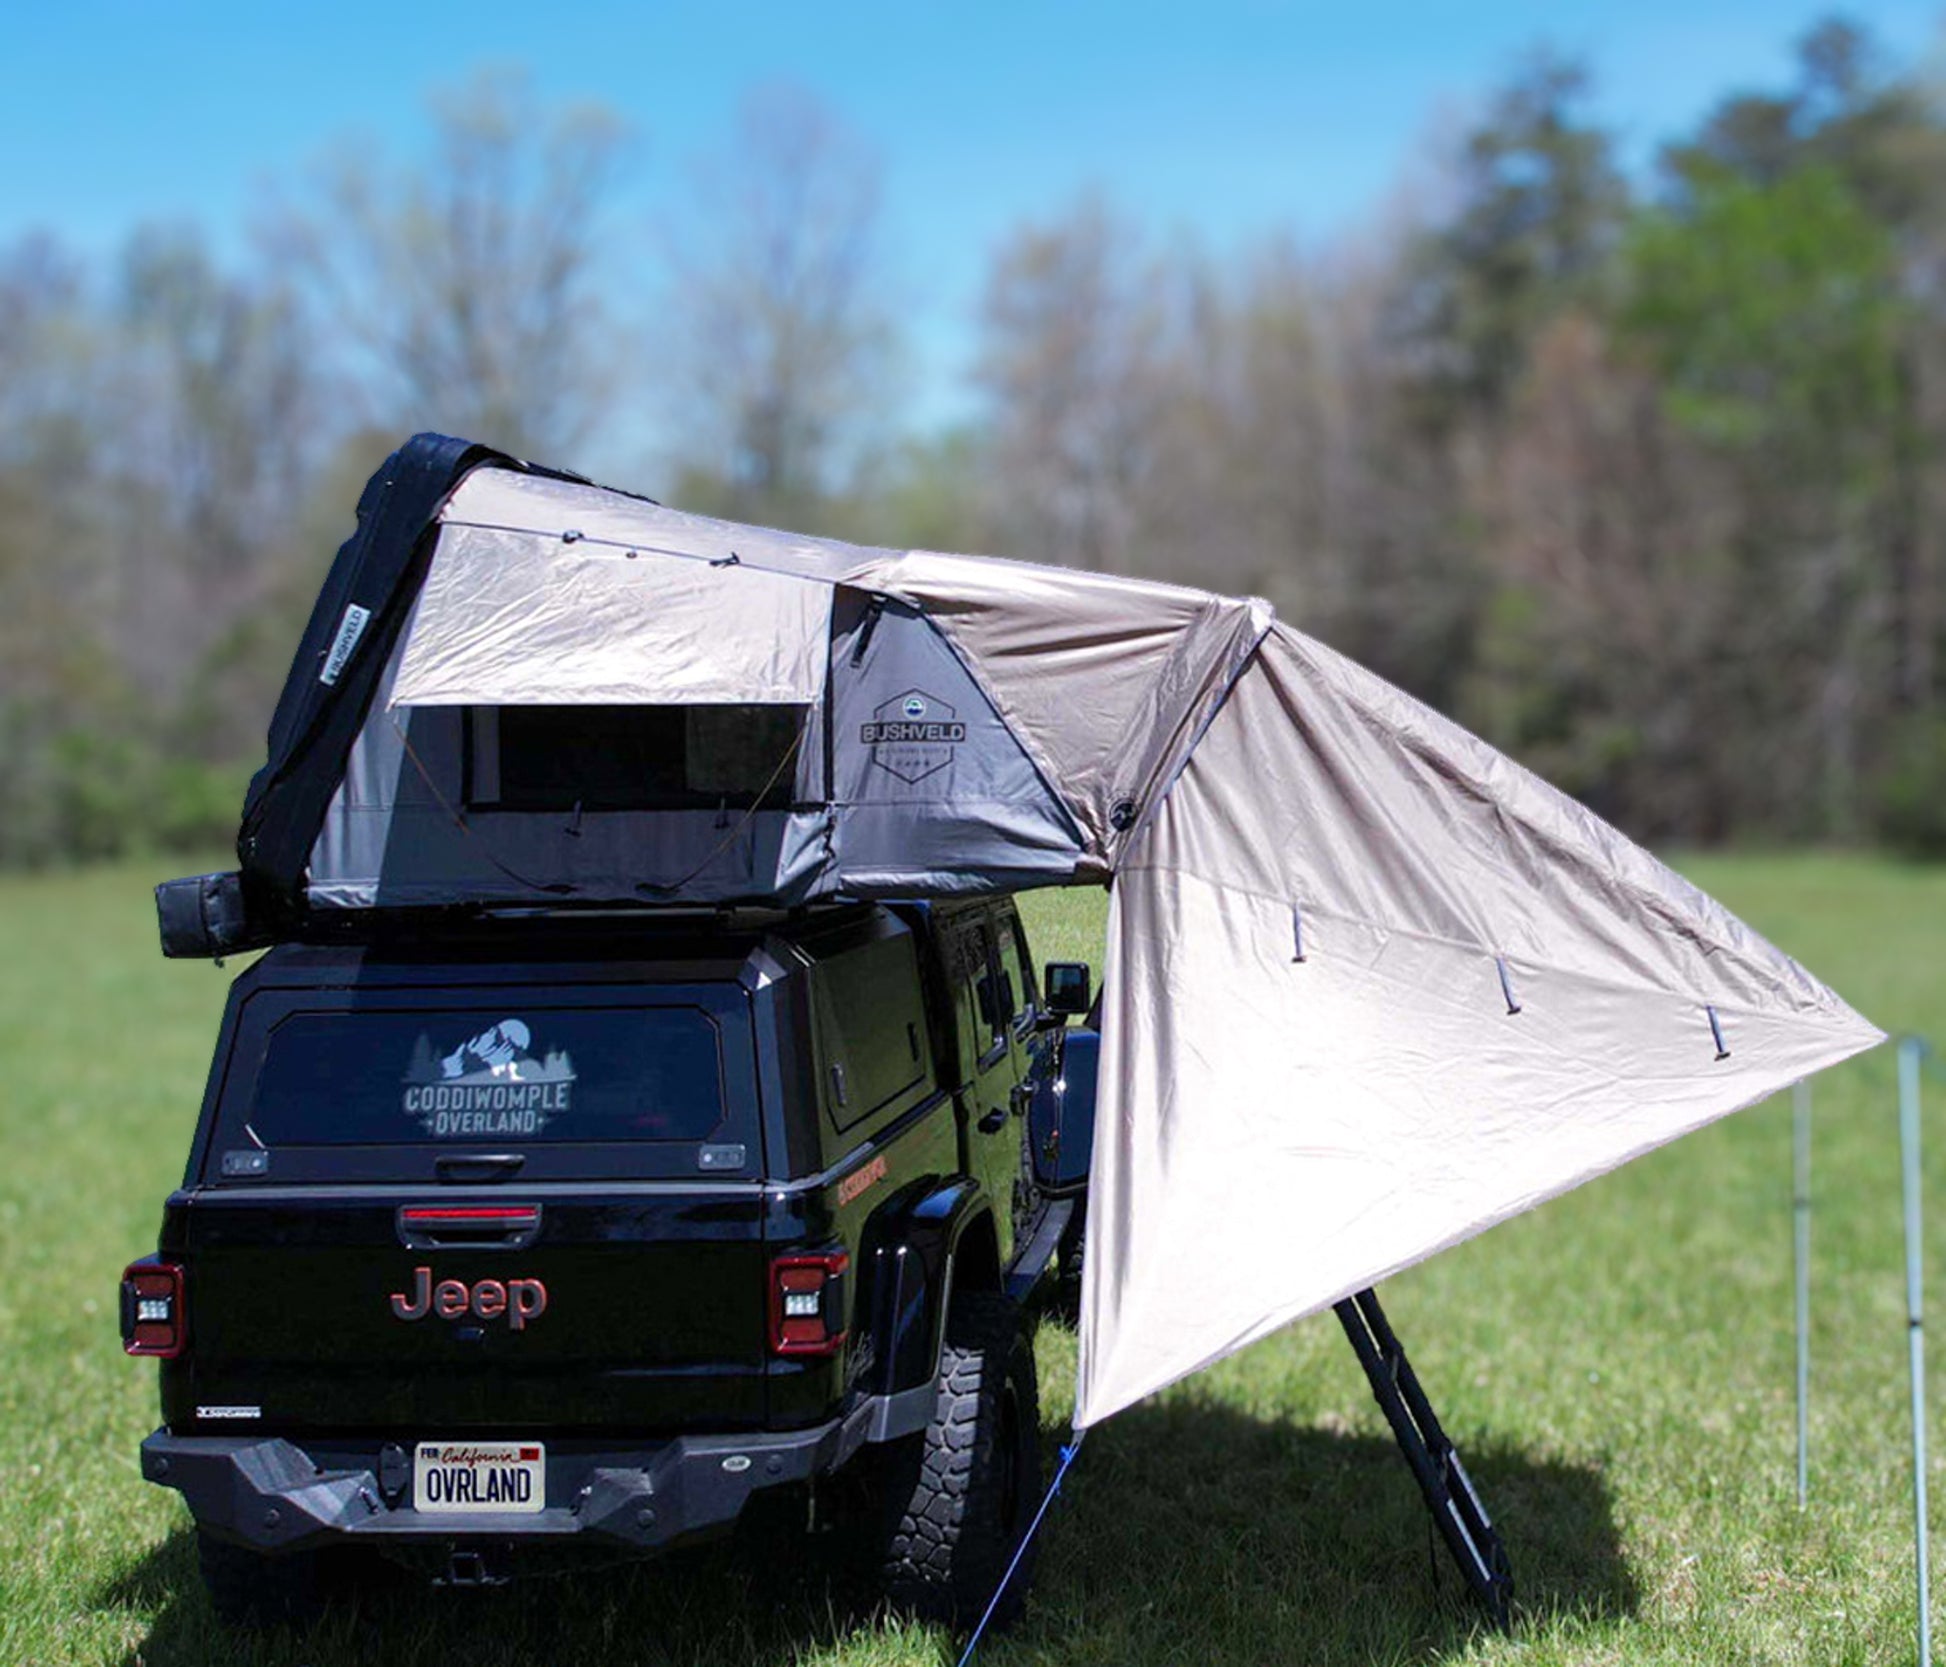 Bushveld II Awning Extension, Camping Gear, Awning Extension for Roof Top Tent, Roof top Camping Gear, Green Body Grey Trim, High Durability, Roof Top Tent Awning